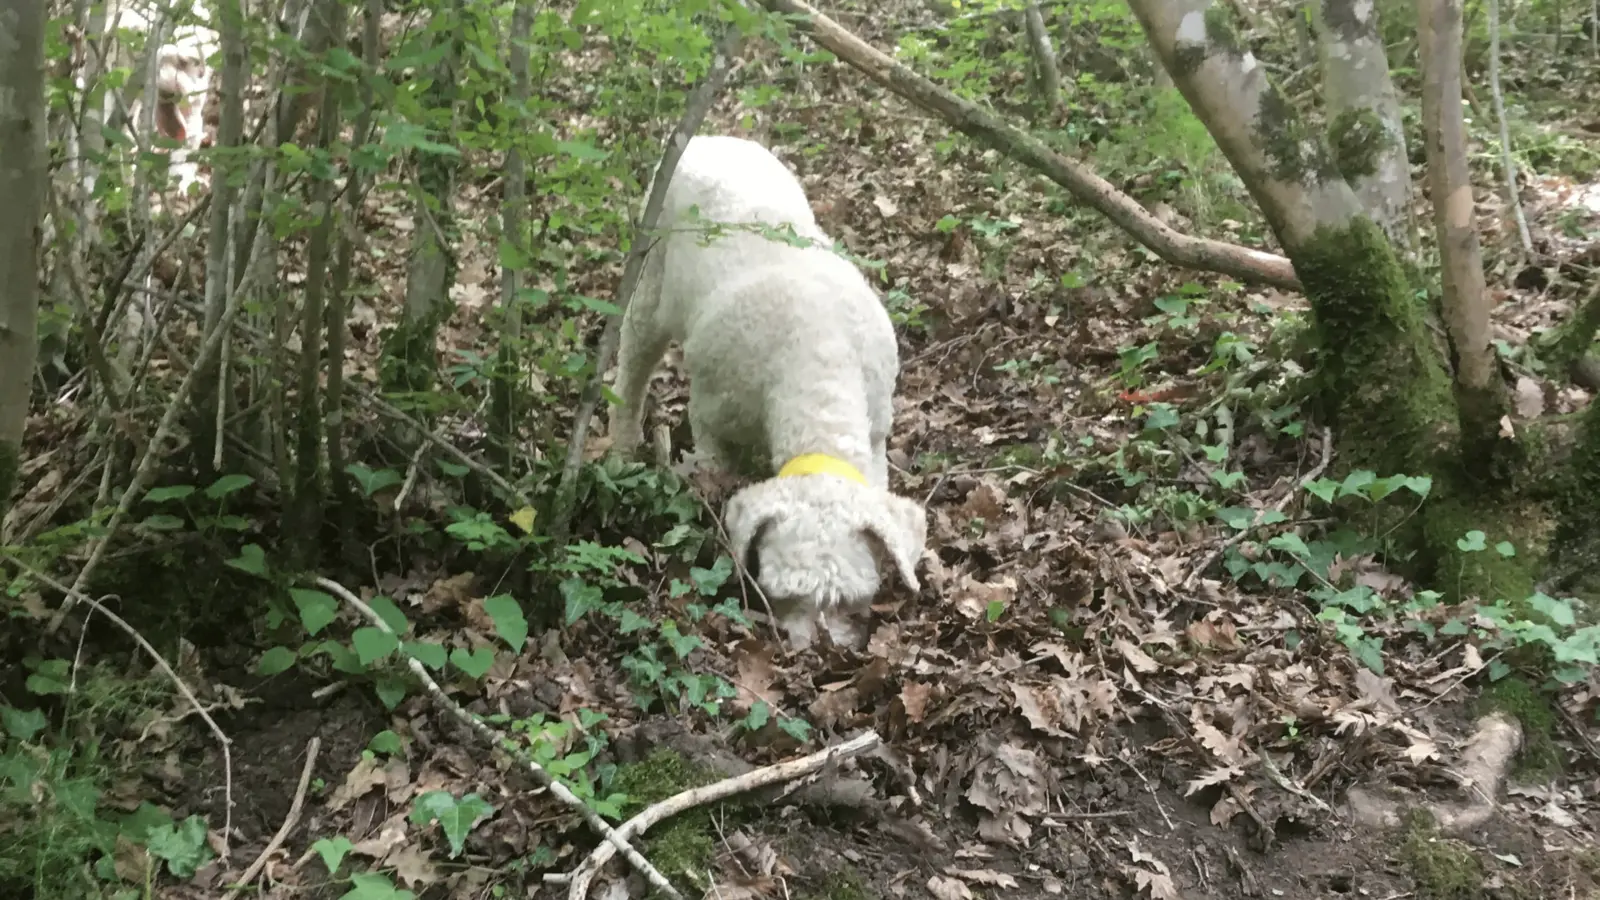 Truffle dog looking for valuable white truffles on a leafy forest floor.